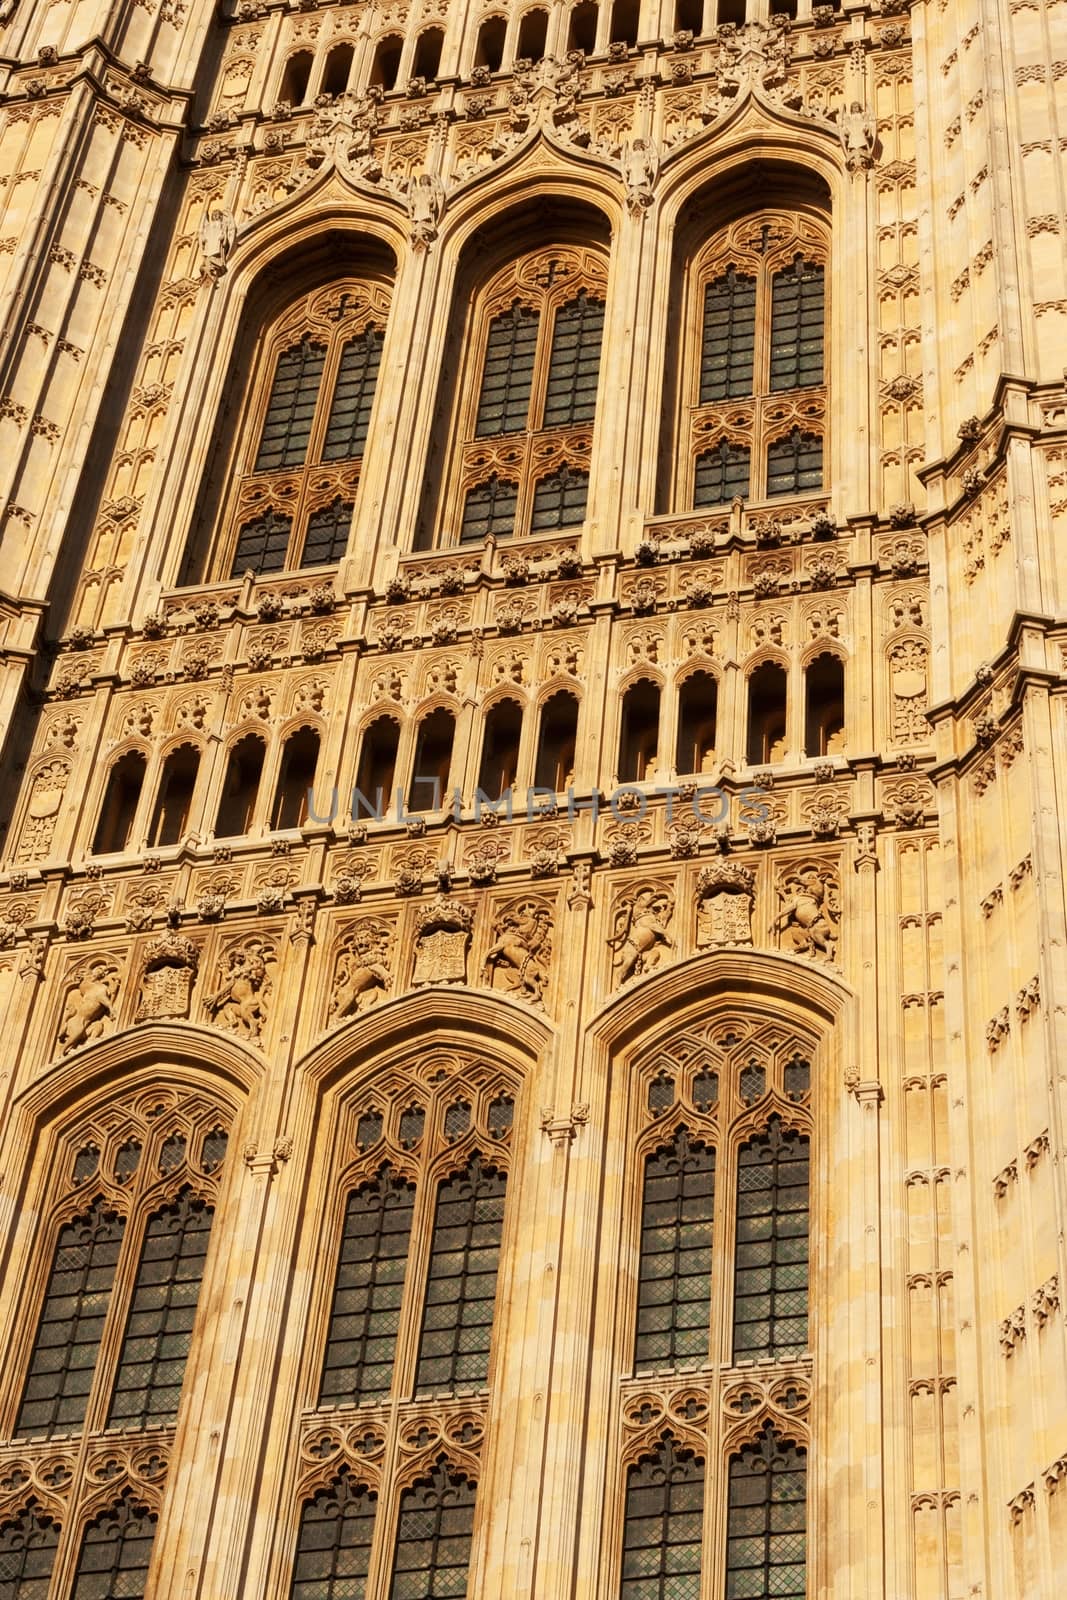 The Houses of Parliament. London. UK, detail